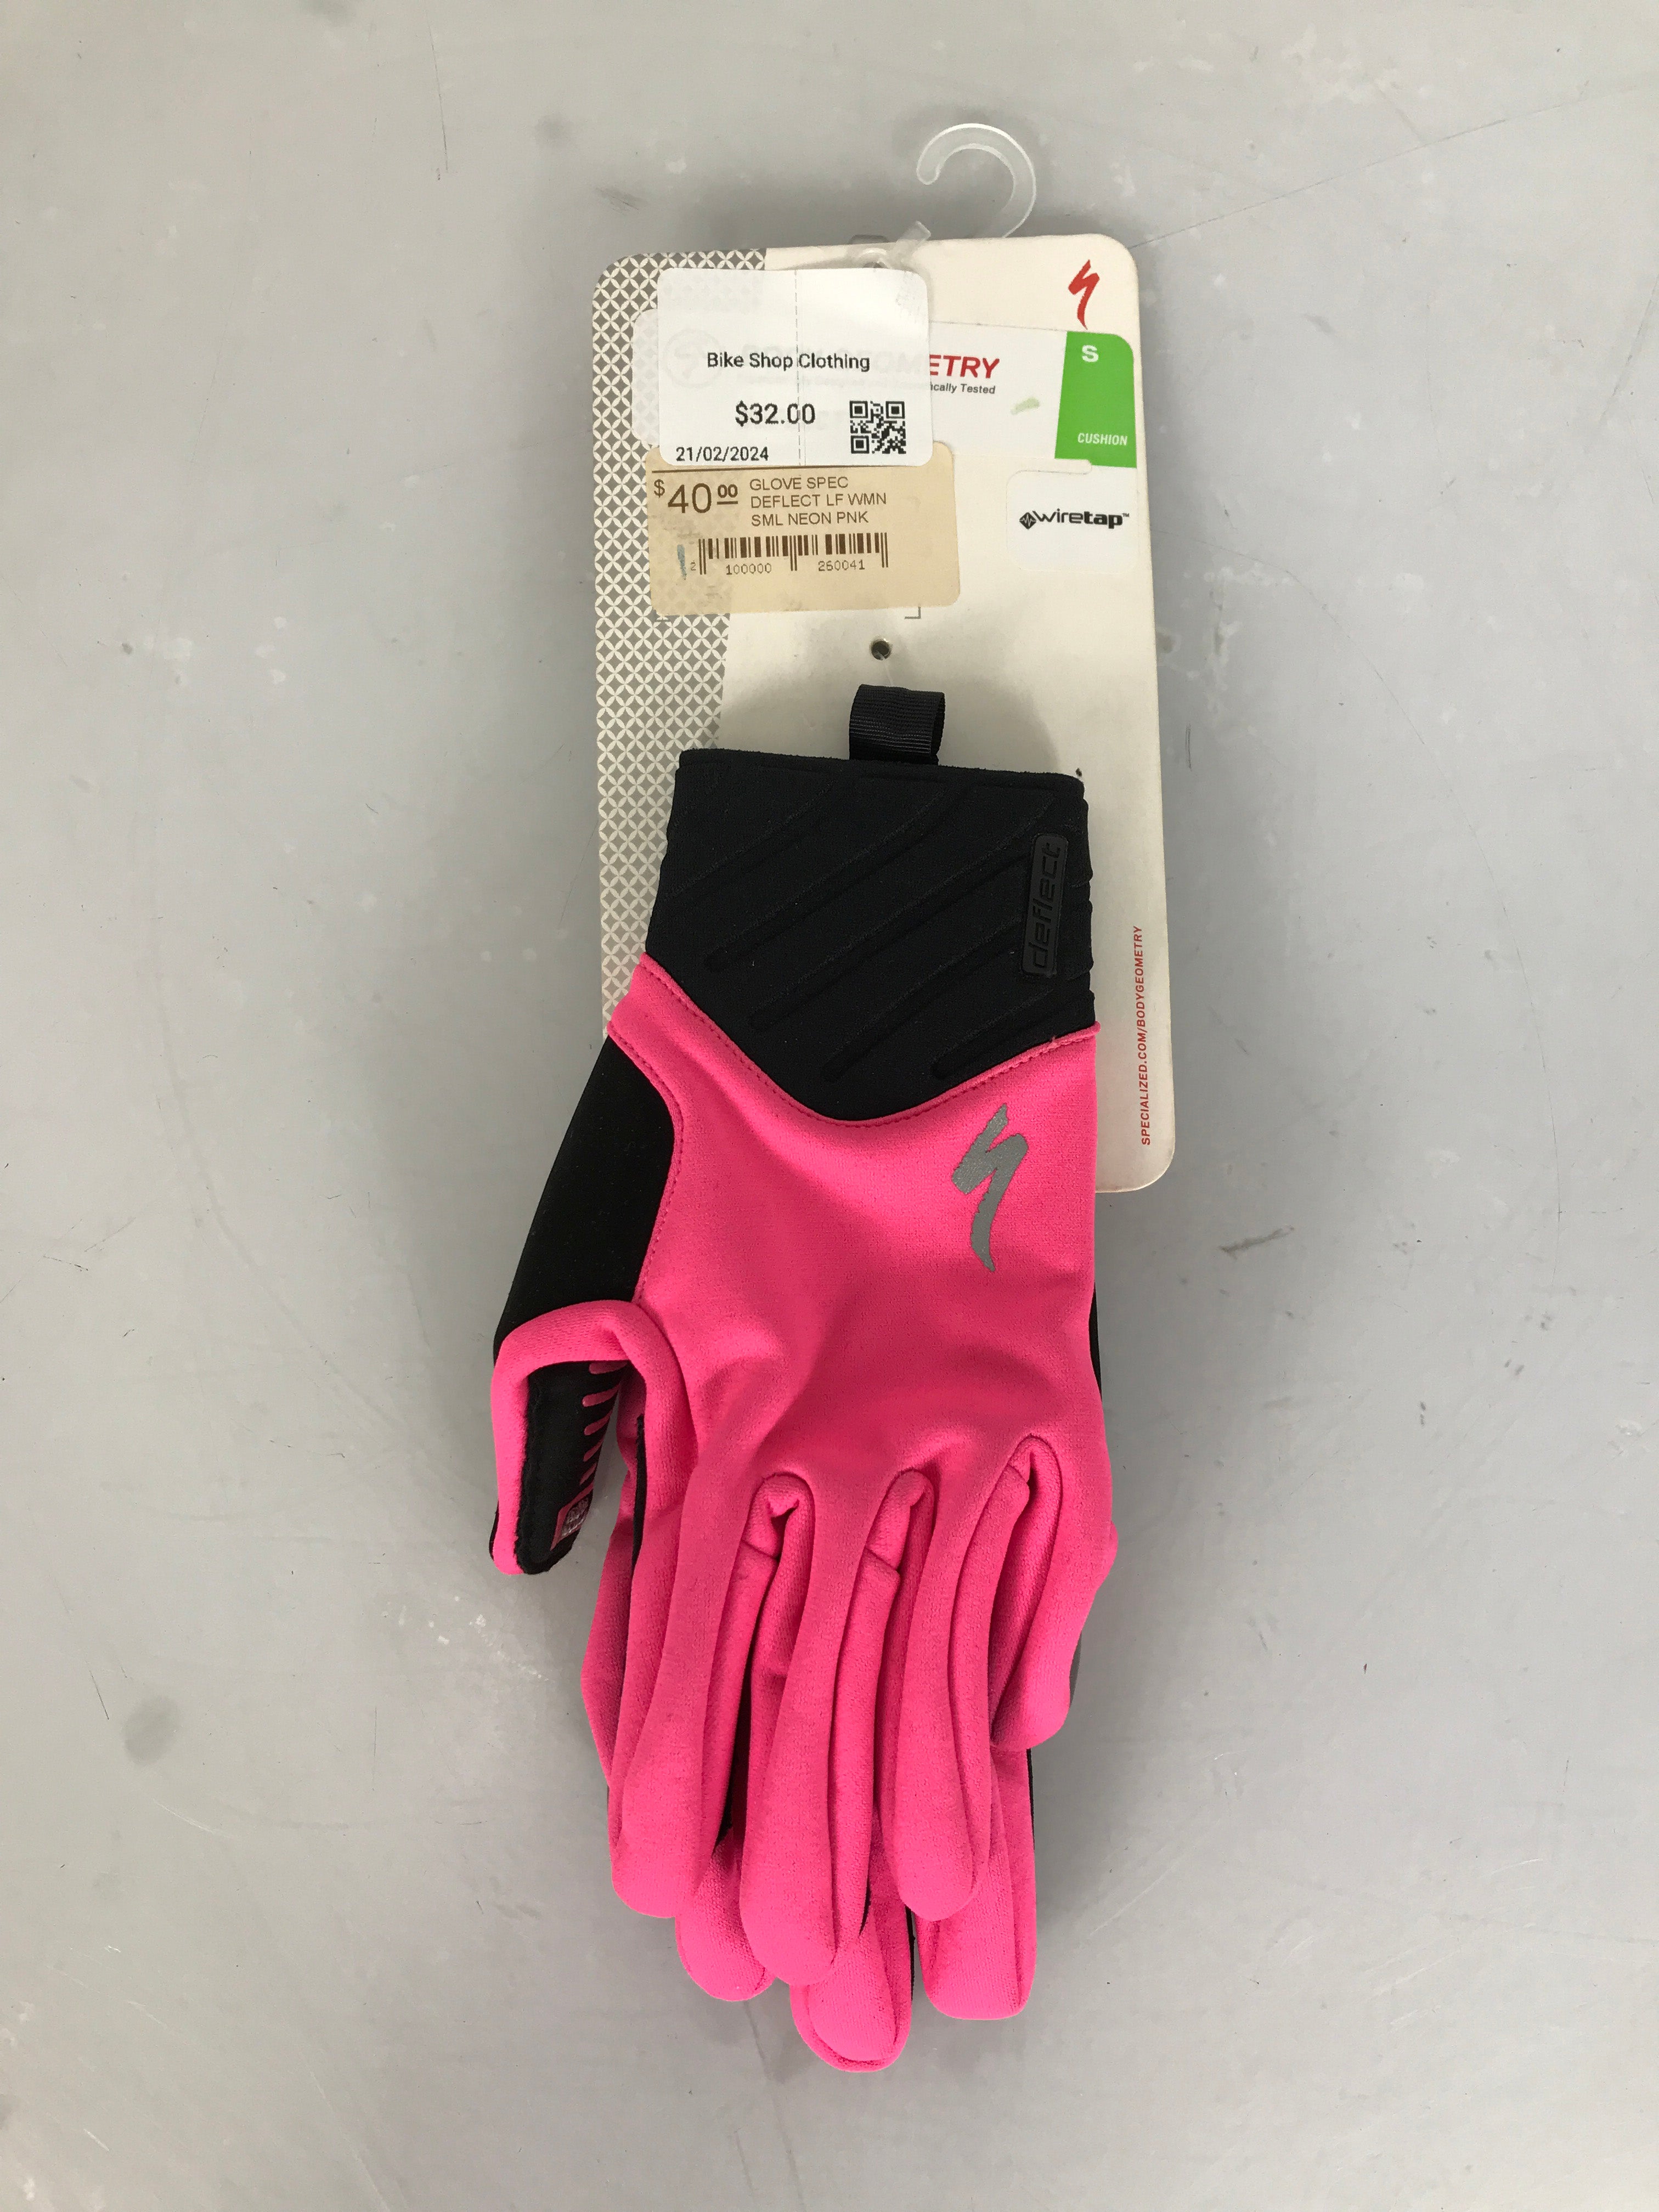 Body Geometry Deflect Cyclist Gloves with Wiretap Neon Pink Women's Size S NWT